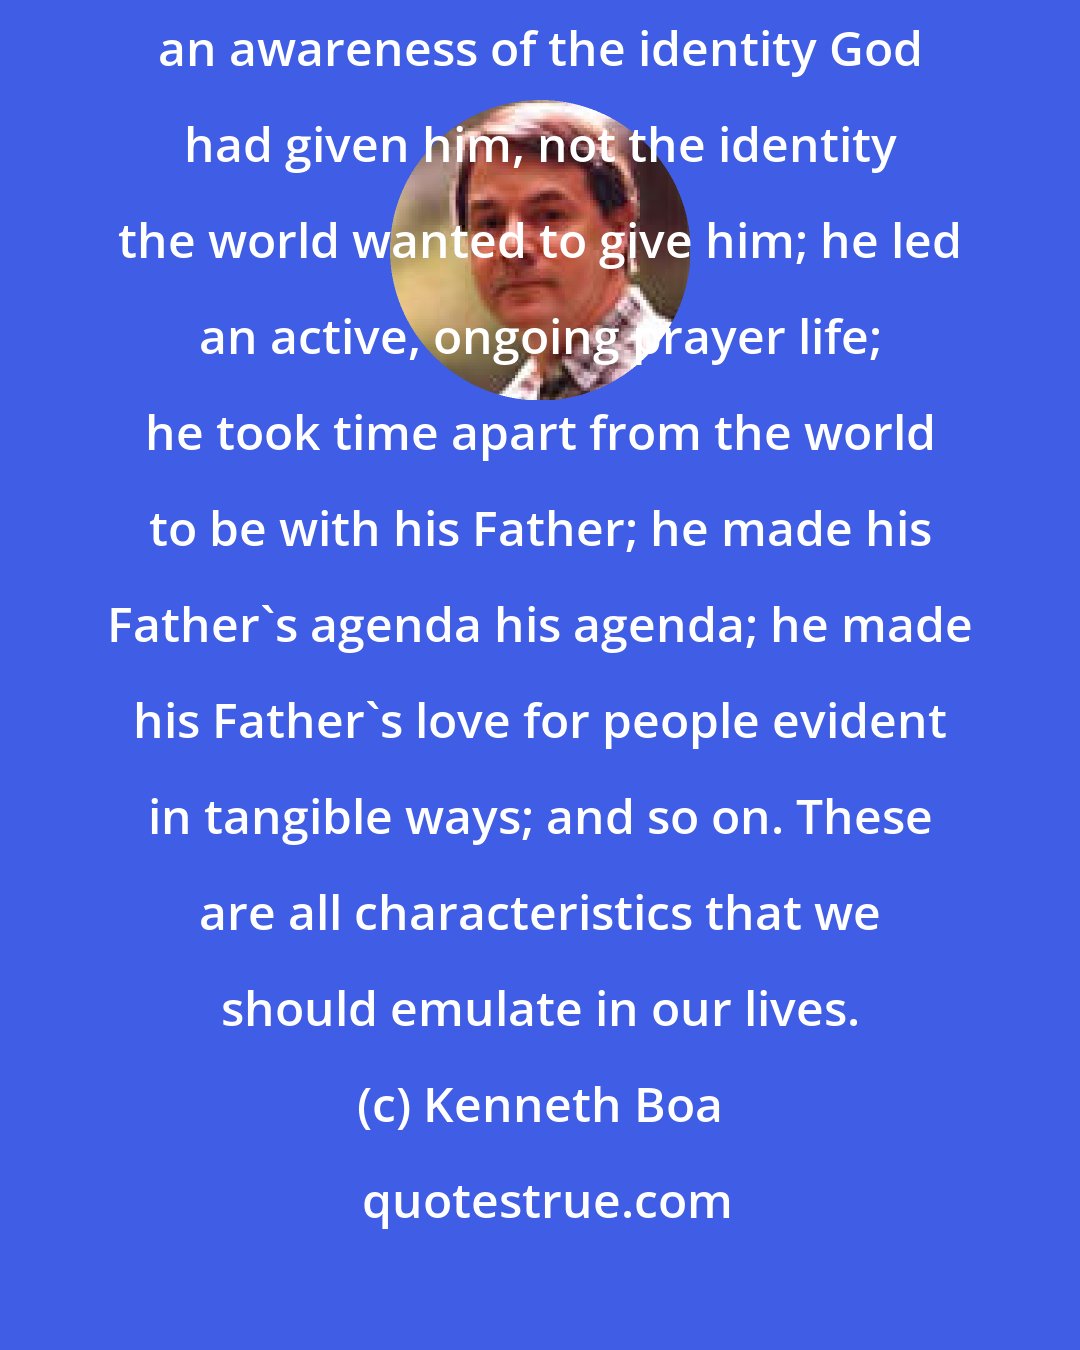 Kenneth Boa: Jesus is the prime exemplar of life in God's presence. He lived out of an awareness of the identity God had given him, not the identity the world wanted to give him; he led an active, ongoing prayer life; he took time apart from the world to be with his Father; he made his Father's agenda his agenda; he made his Father's love for people evident in tangible ways; and so on. These are all characteristics that we should emulate in our lives.